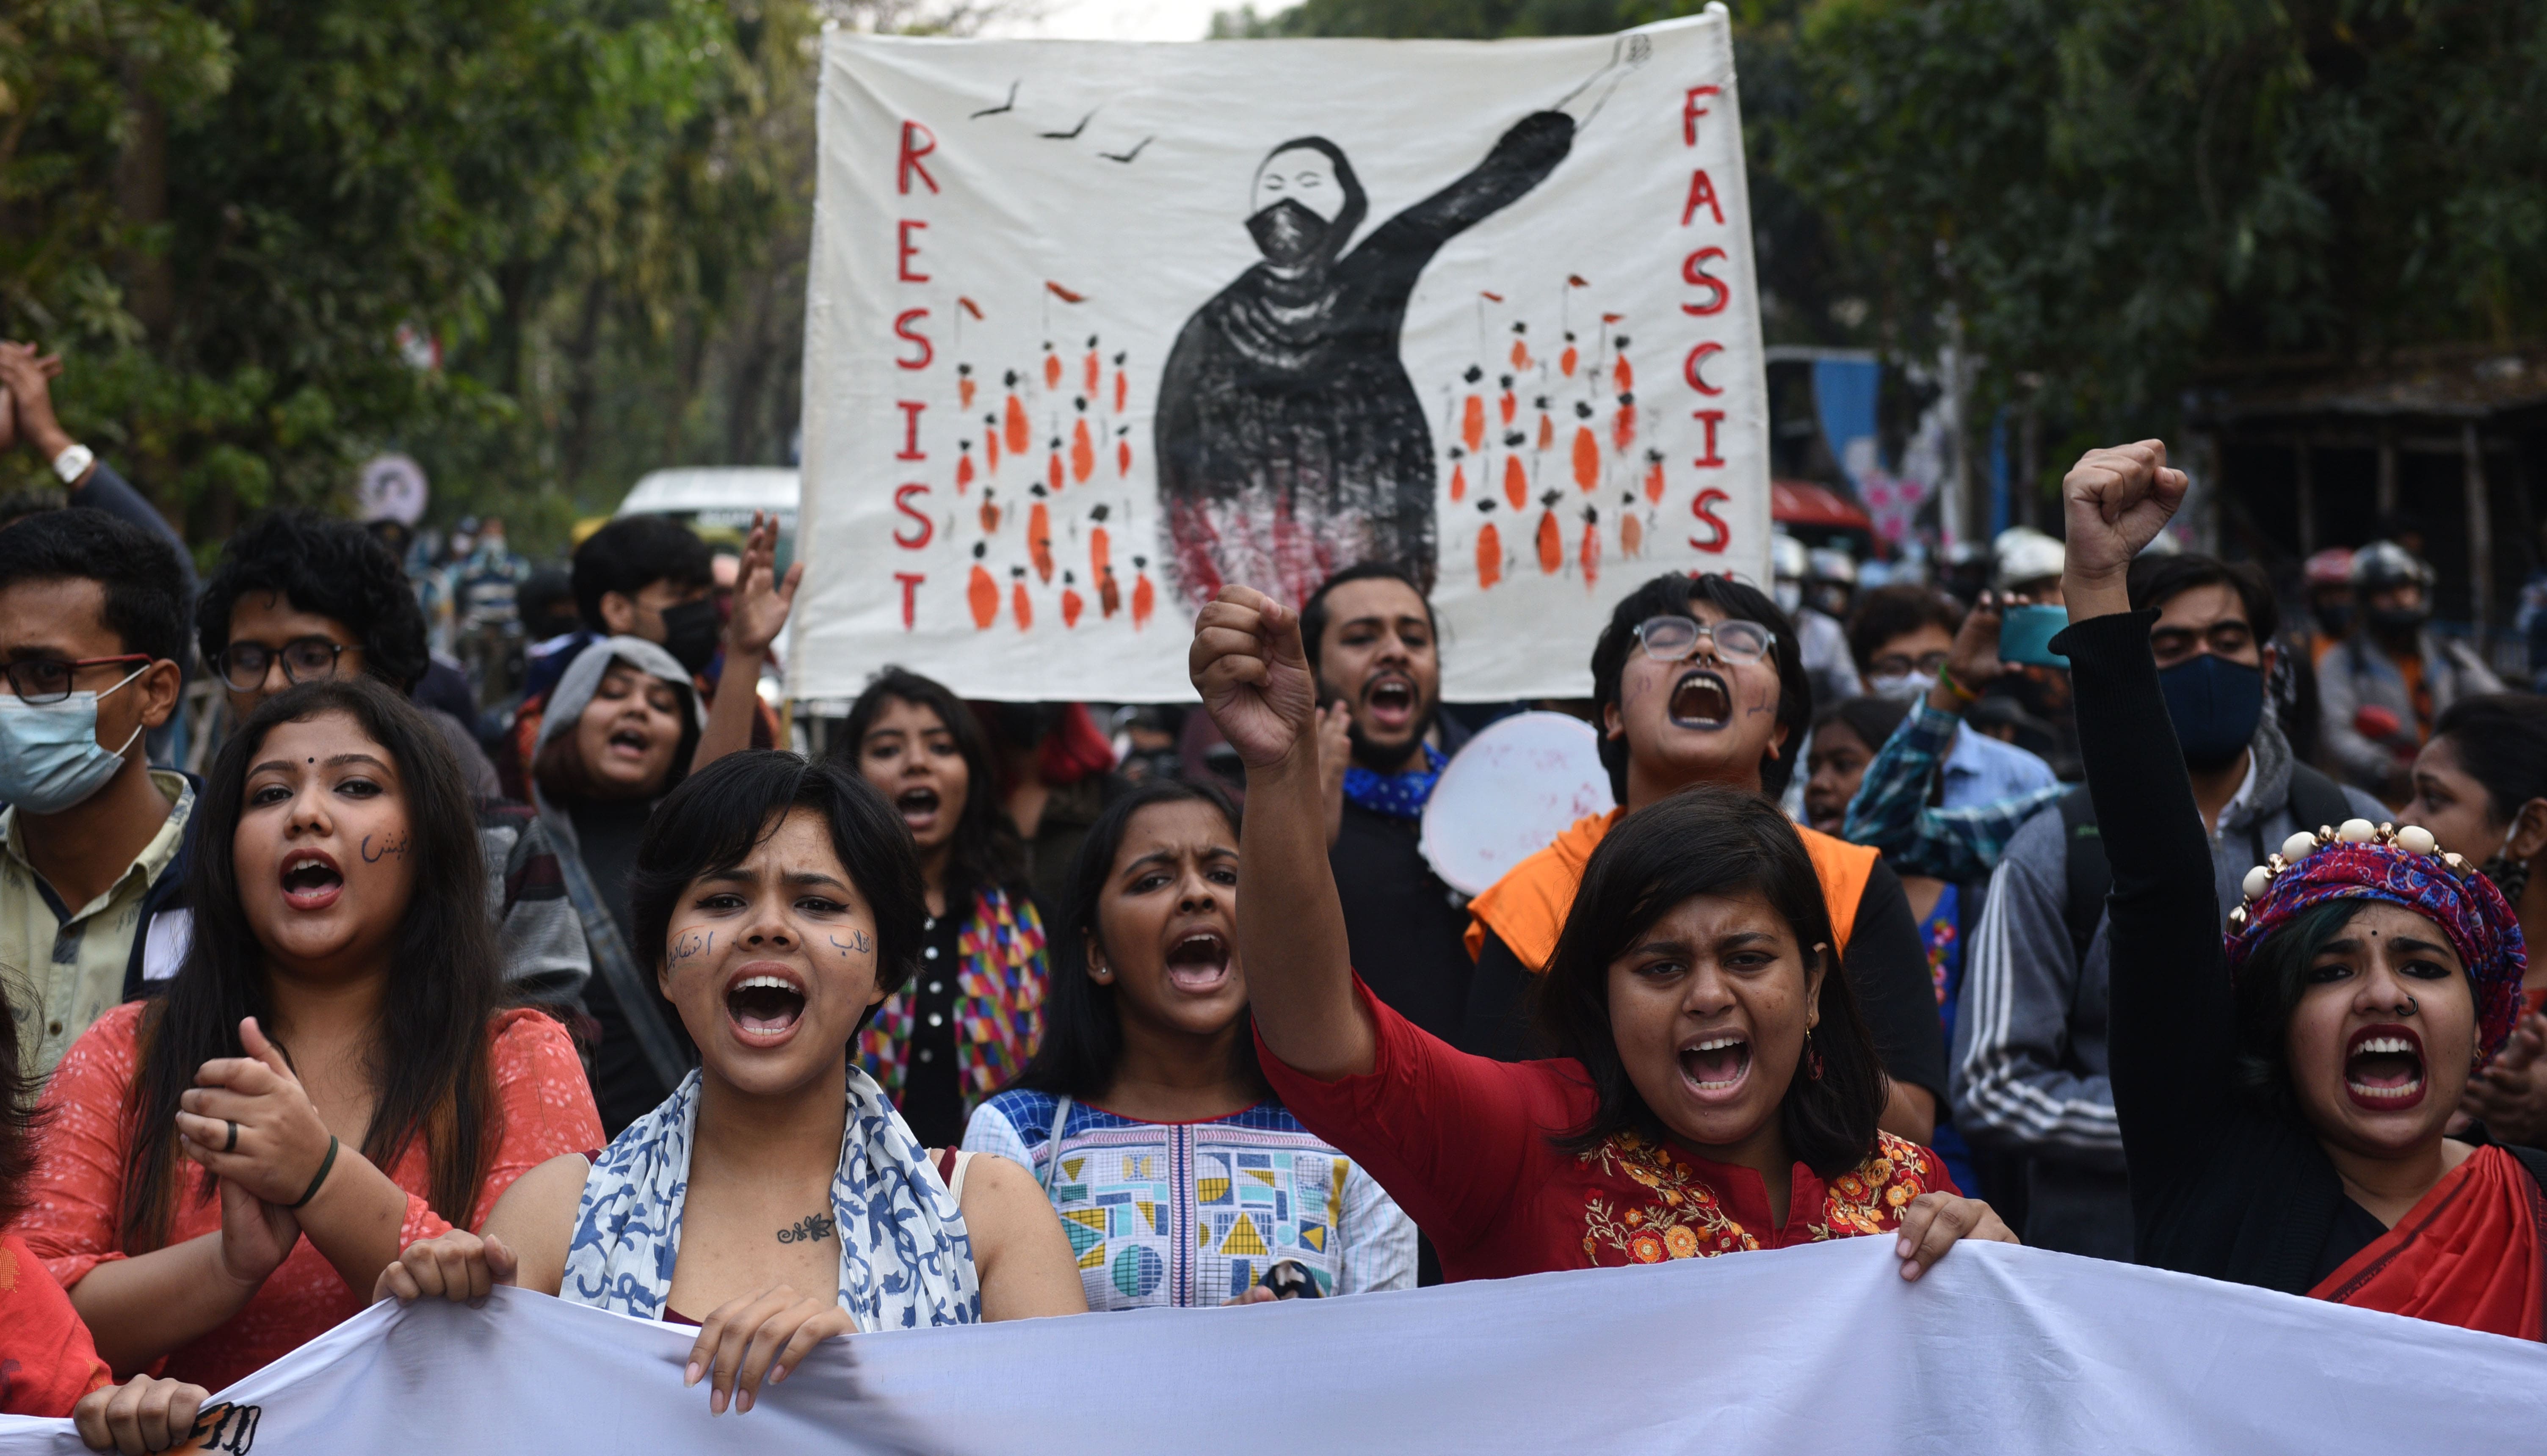 An Indian state banned Muslim girls from wearing hijabs in school and people were protesting